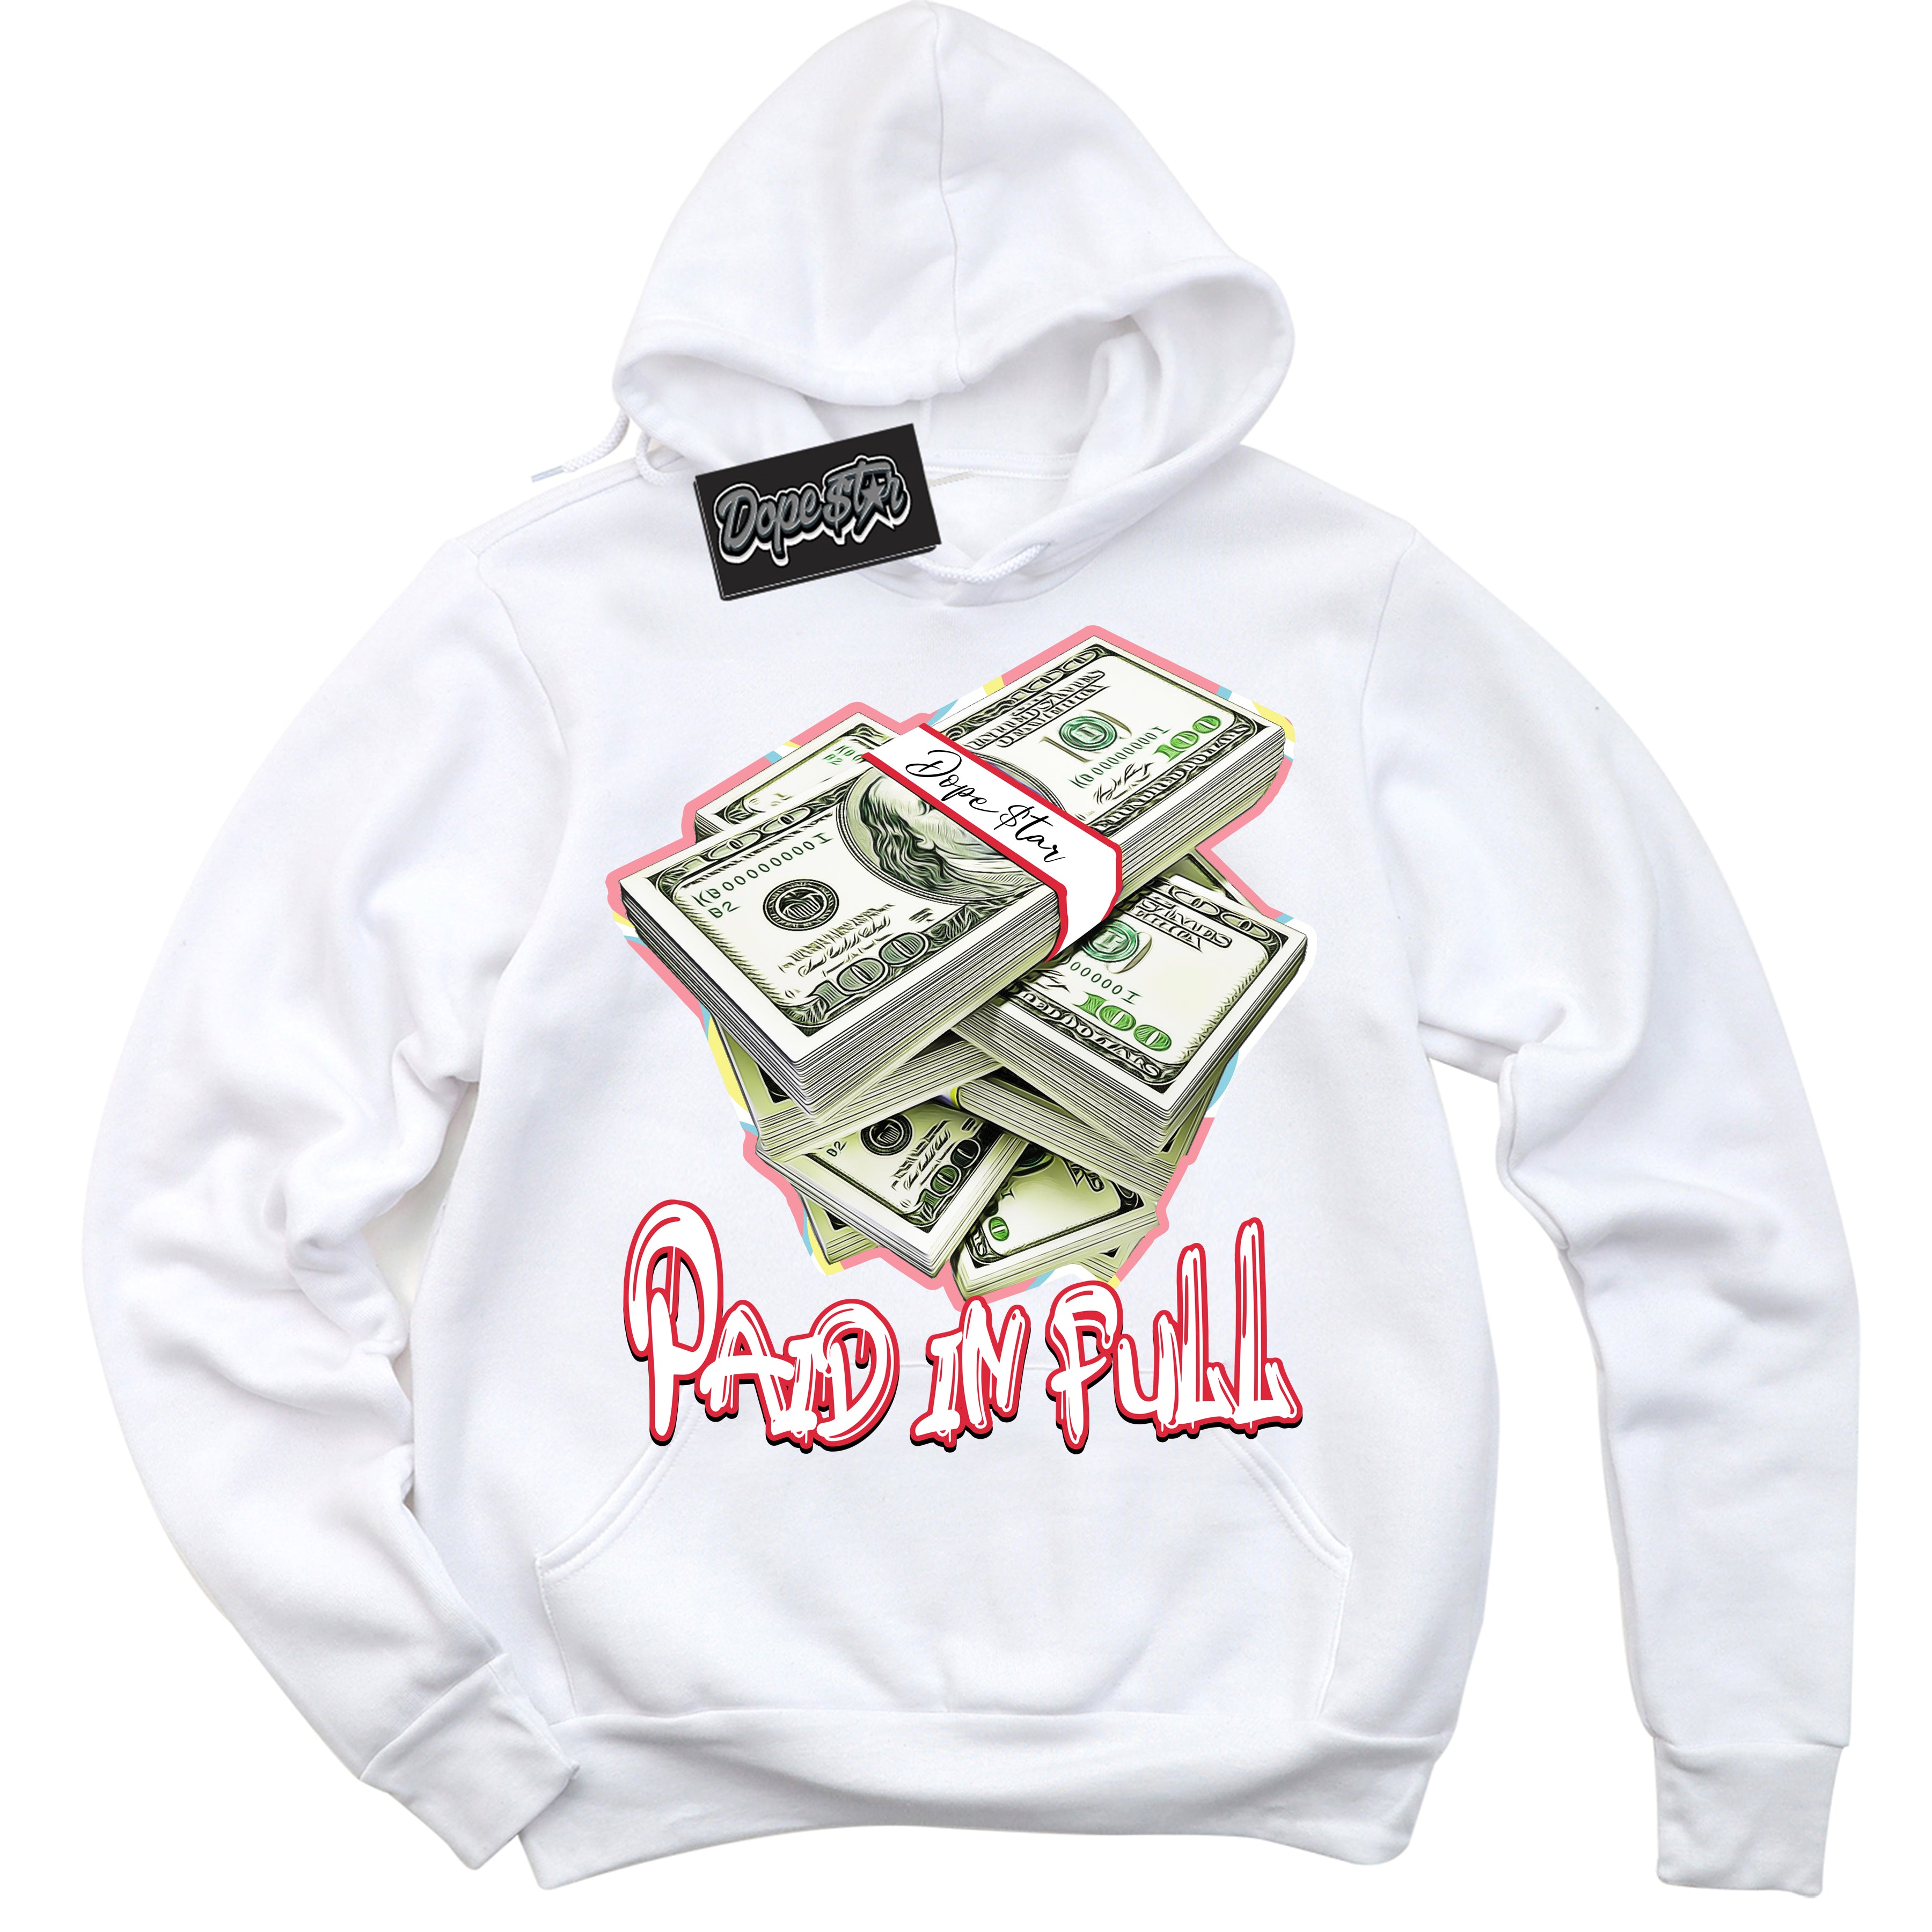 Cool White Graphic DopeStar Hoodie with “ Paid In Full “ print, that perfectly matches Spider-Verse 1s sneakers